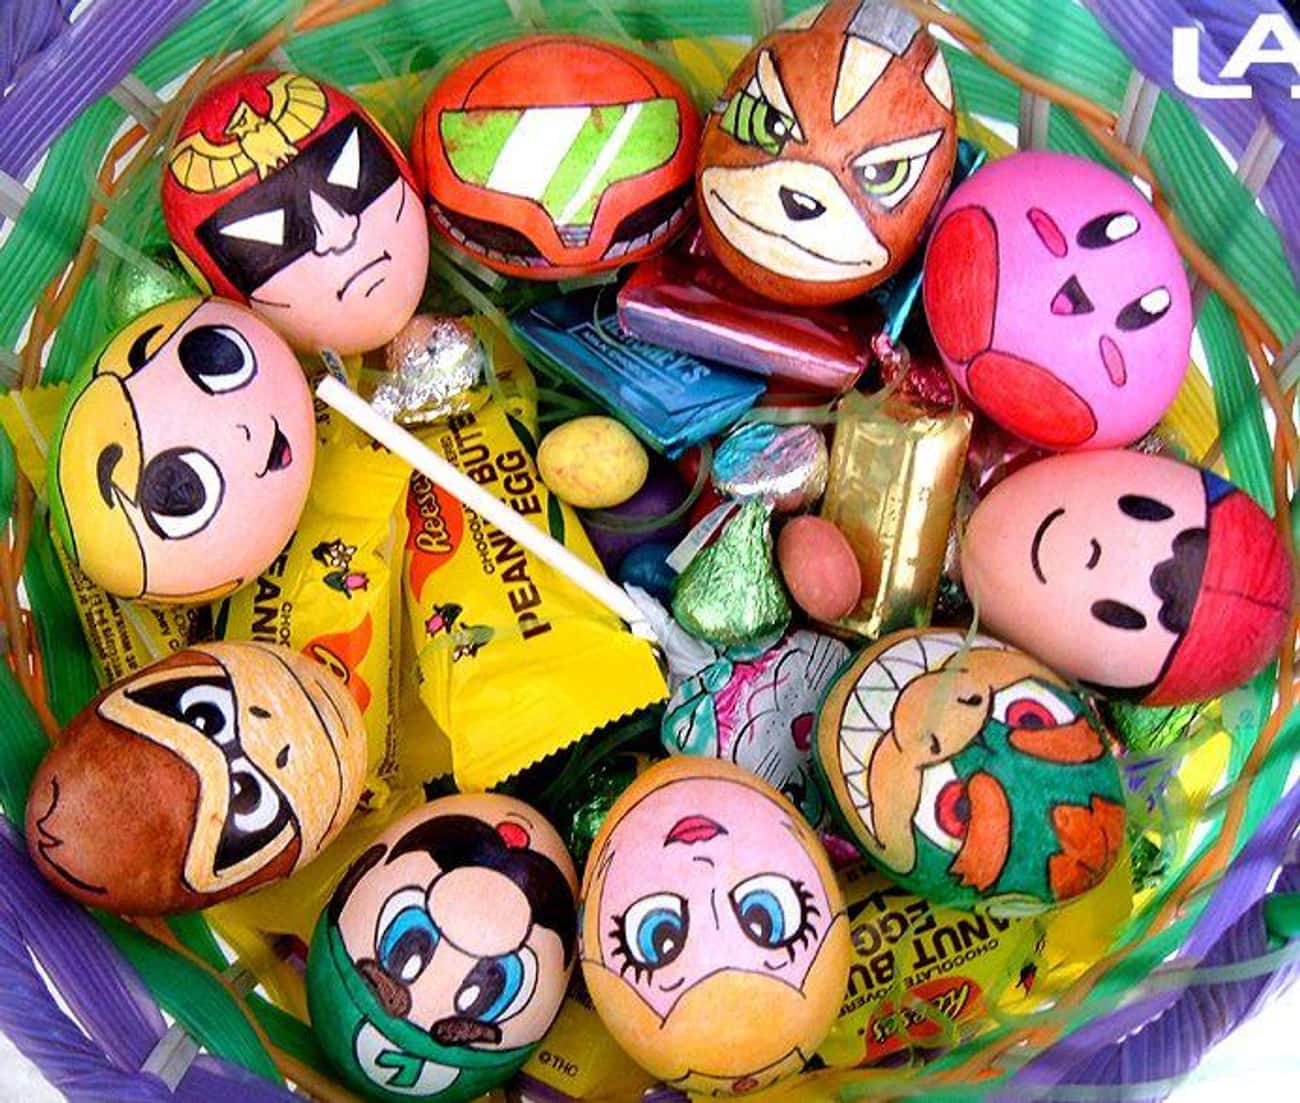 These Classic Nintendo Throwback Eggs